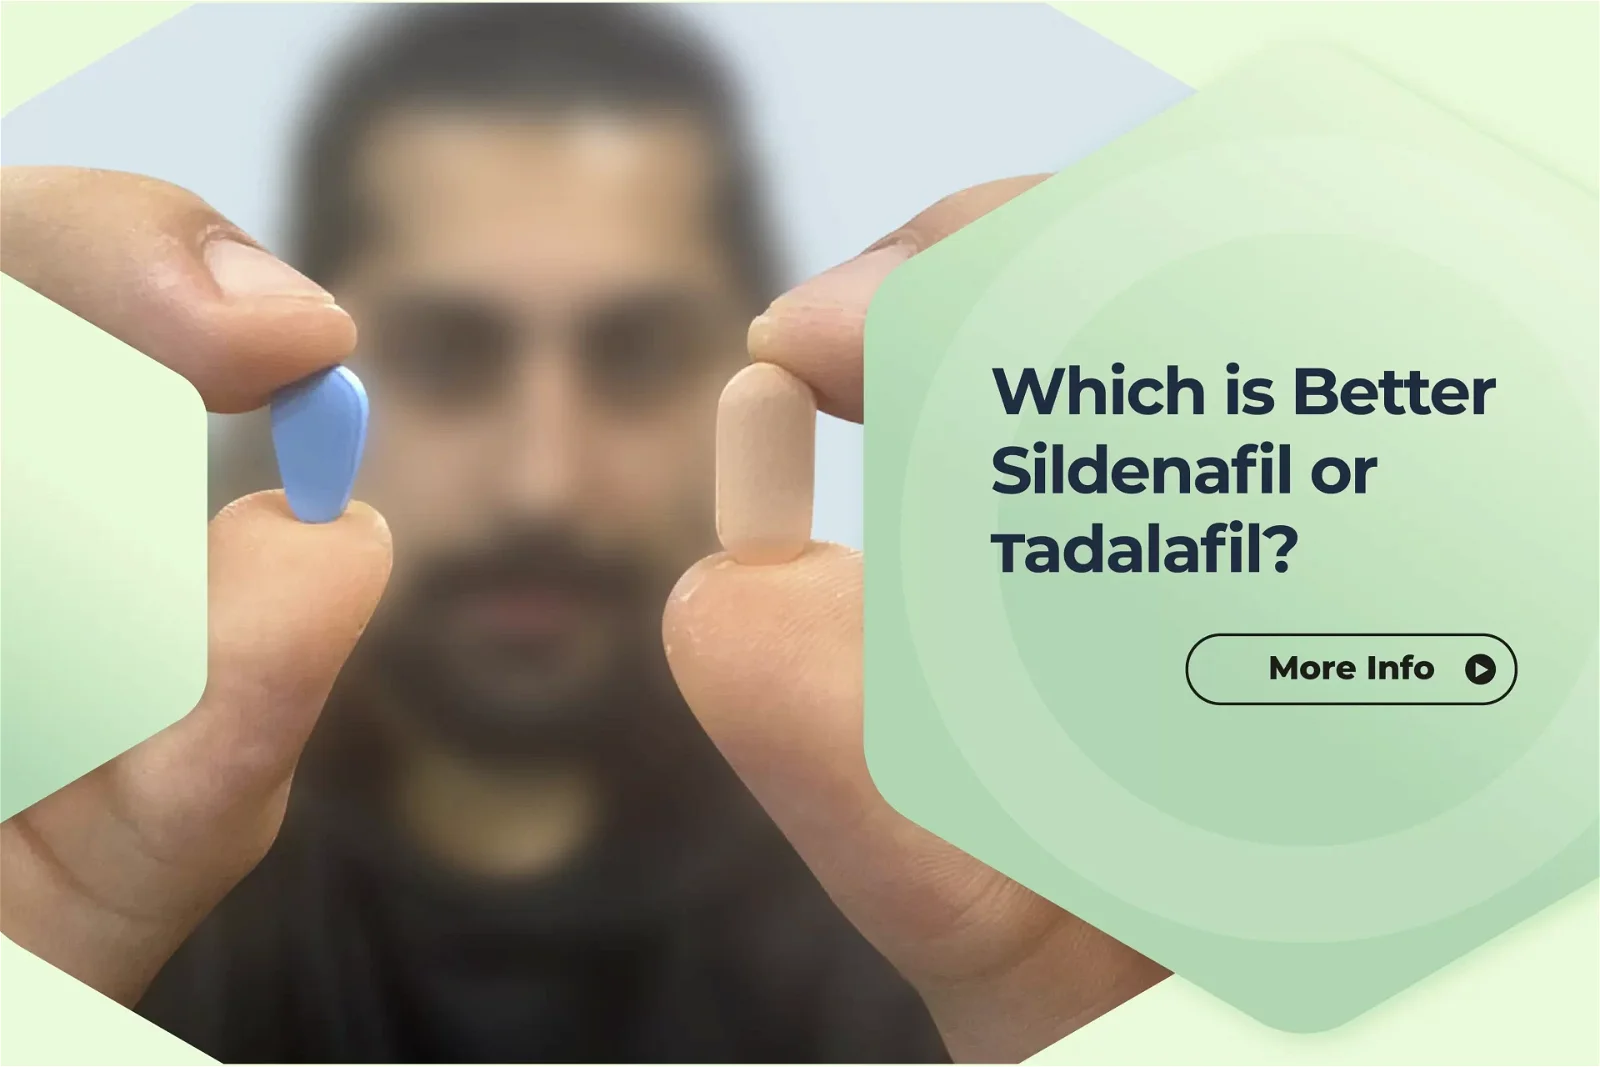 Which is better sildenafil or tadalafil